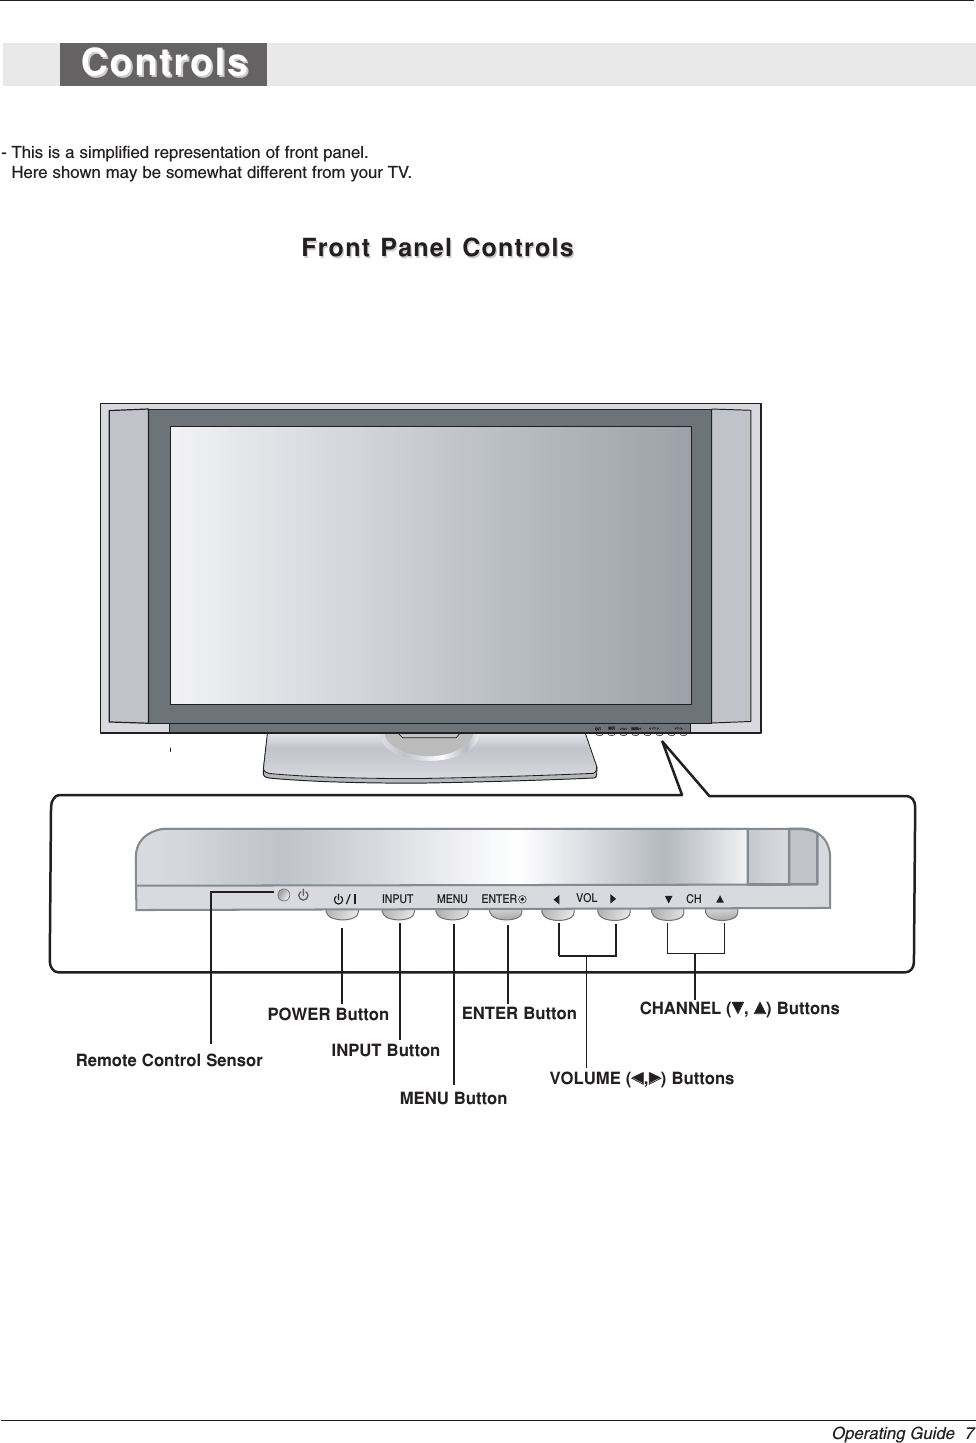 Operating Guide  7- This is a simplified representation of front panel. Here shown may be somewhat different from your TV.ControlsControlsFront Panel ControlsFront Panel ControlsCHVOLMENUINPUT ENTERINPUTINPUT ENTERENTERINPUT ENTERPOWER ButtonRemote Control SensorVOLUME (FF,GG) ButtonsCHANNEL (EE, DD) ButtonsMENU ButtonINPUT ButtonENTER Button